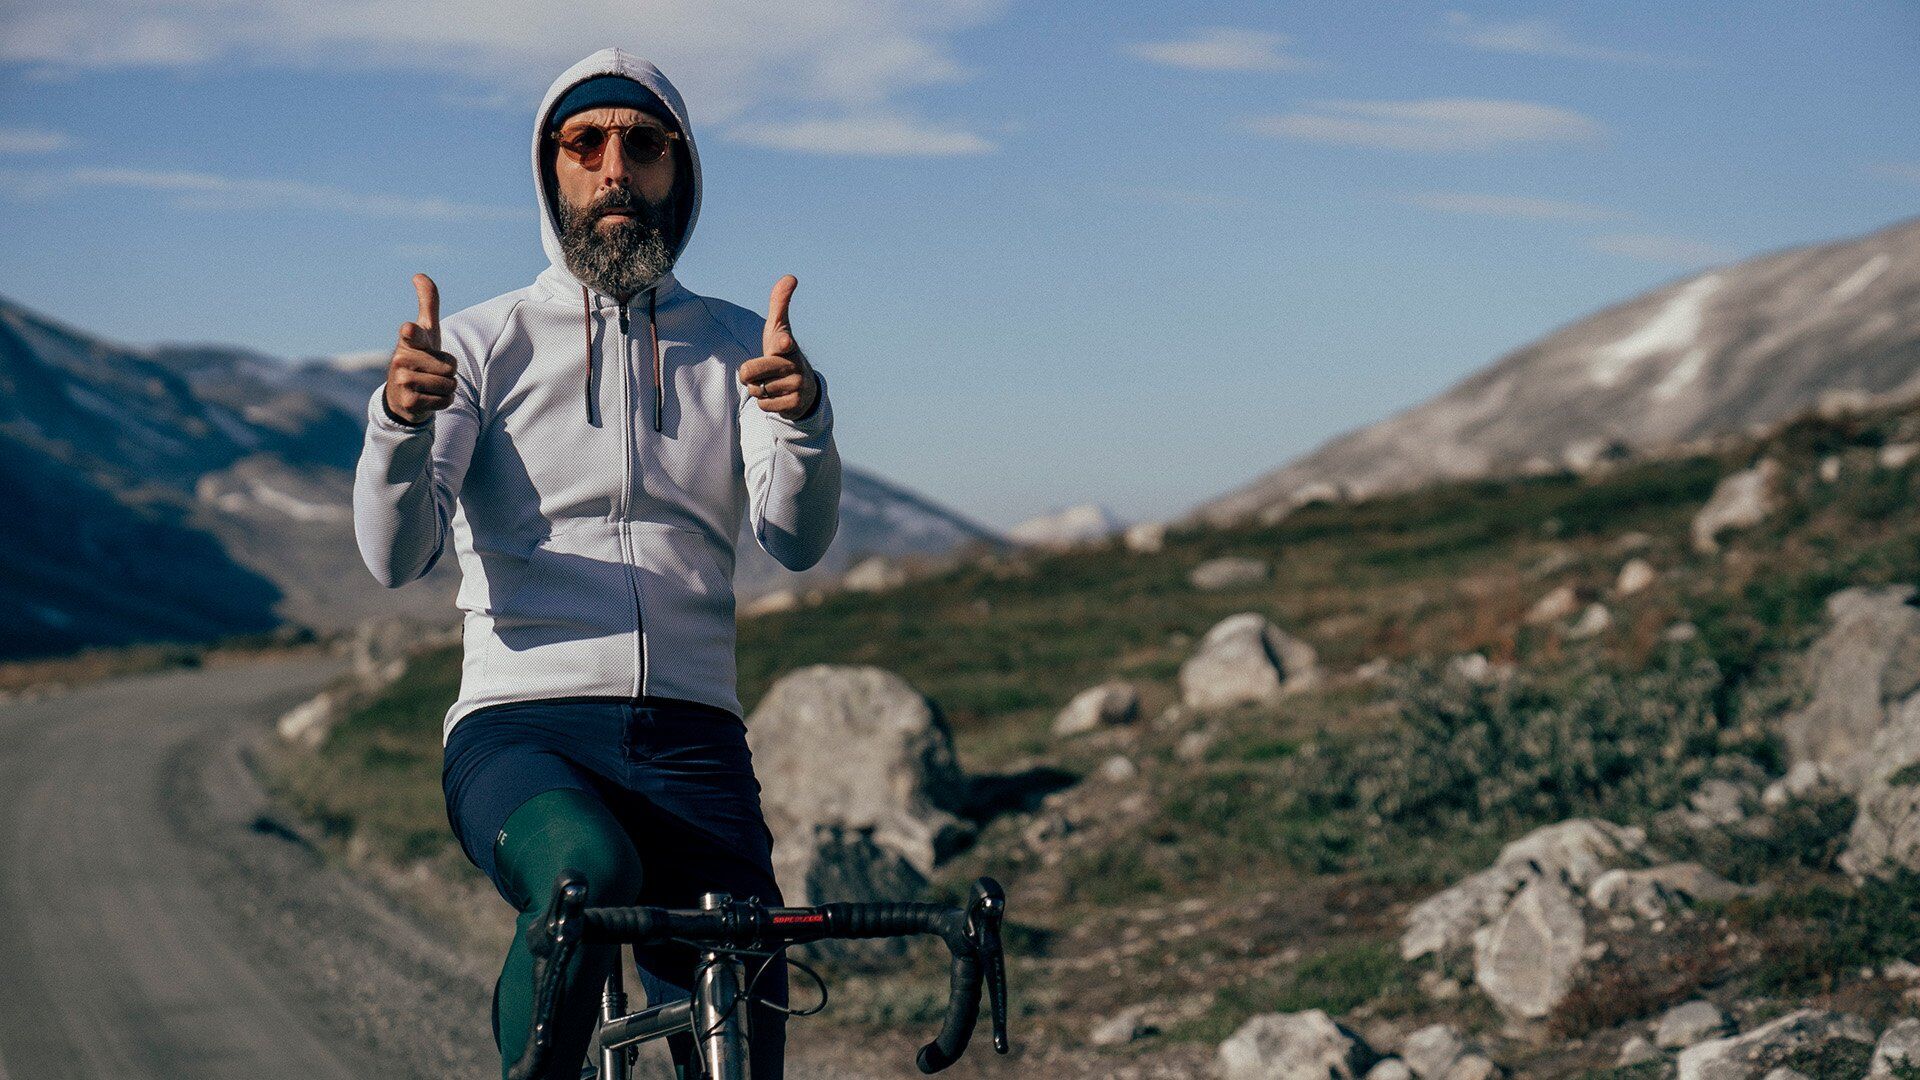 Man giving two thumbs up in a scenic mountainous landscape, symbolizing Bici's commitment to exhilarating cycling experiences and community connection @ Bici.